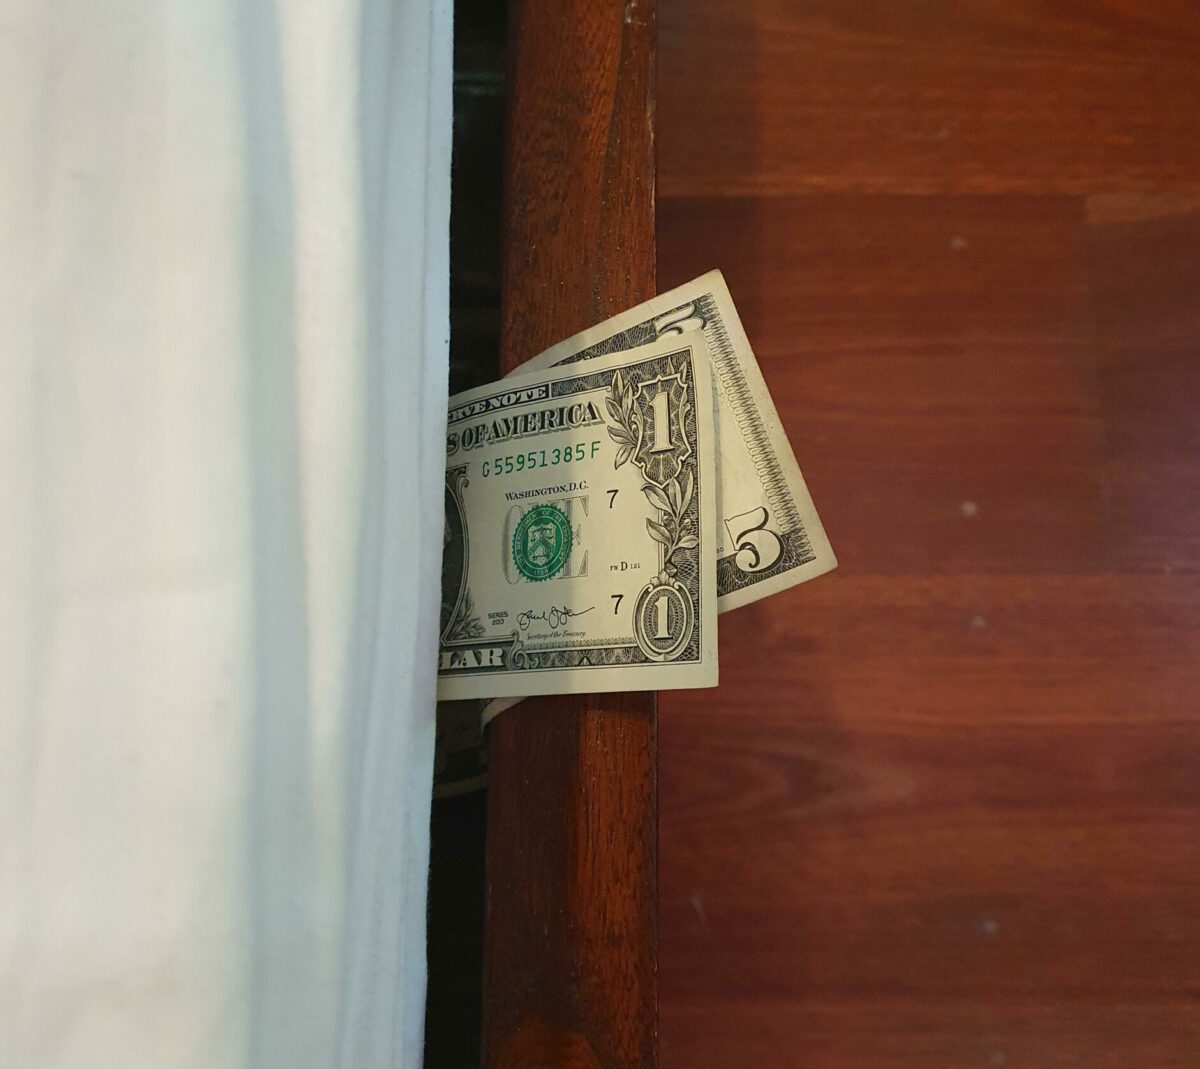 A photograph by Maddy Watson of cash money sticking out from under a mattress